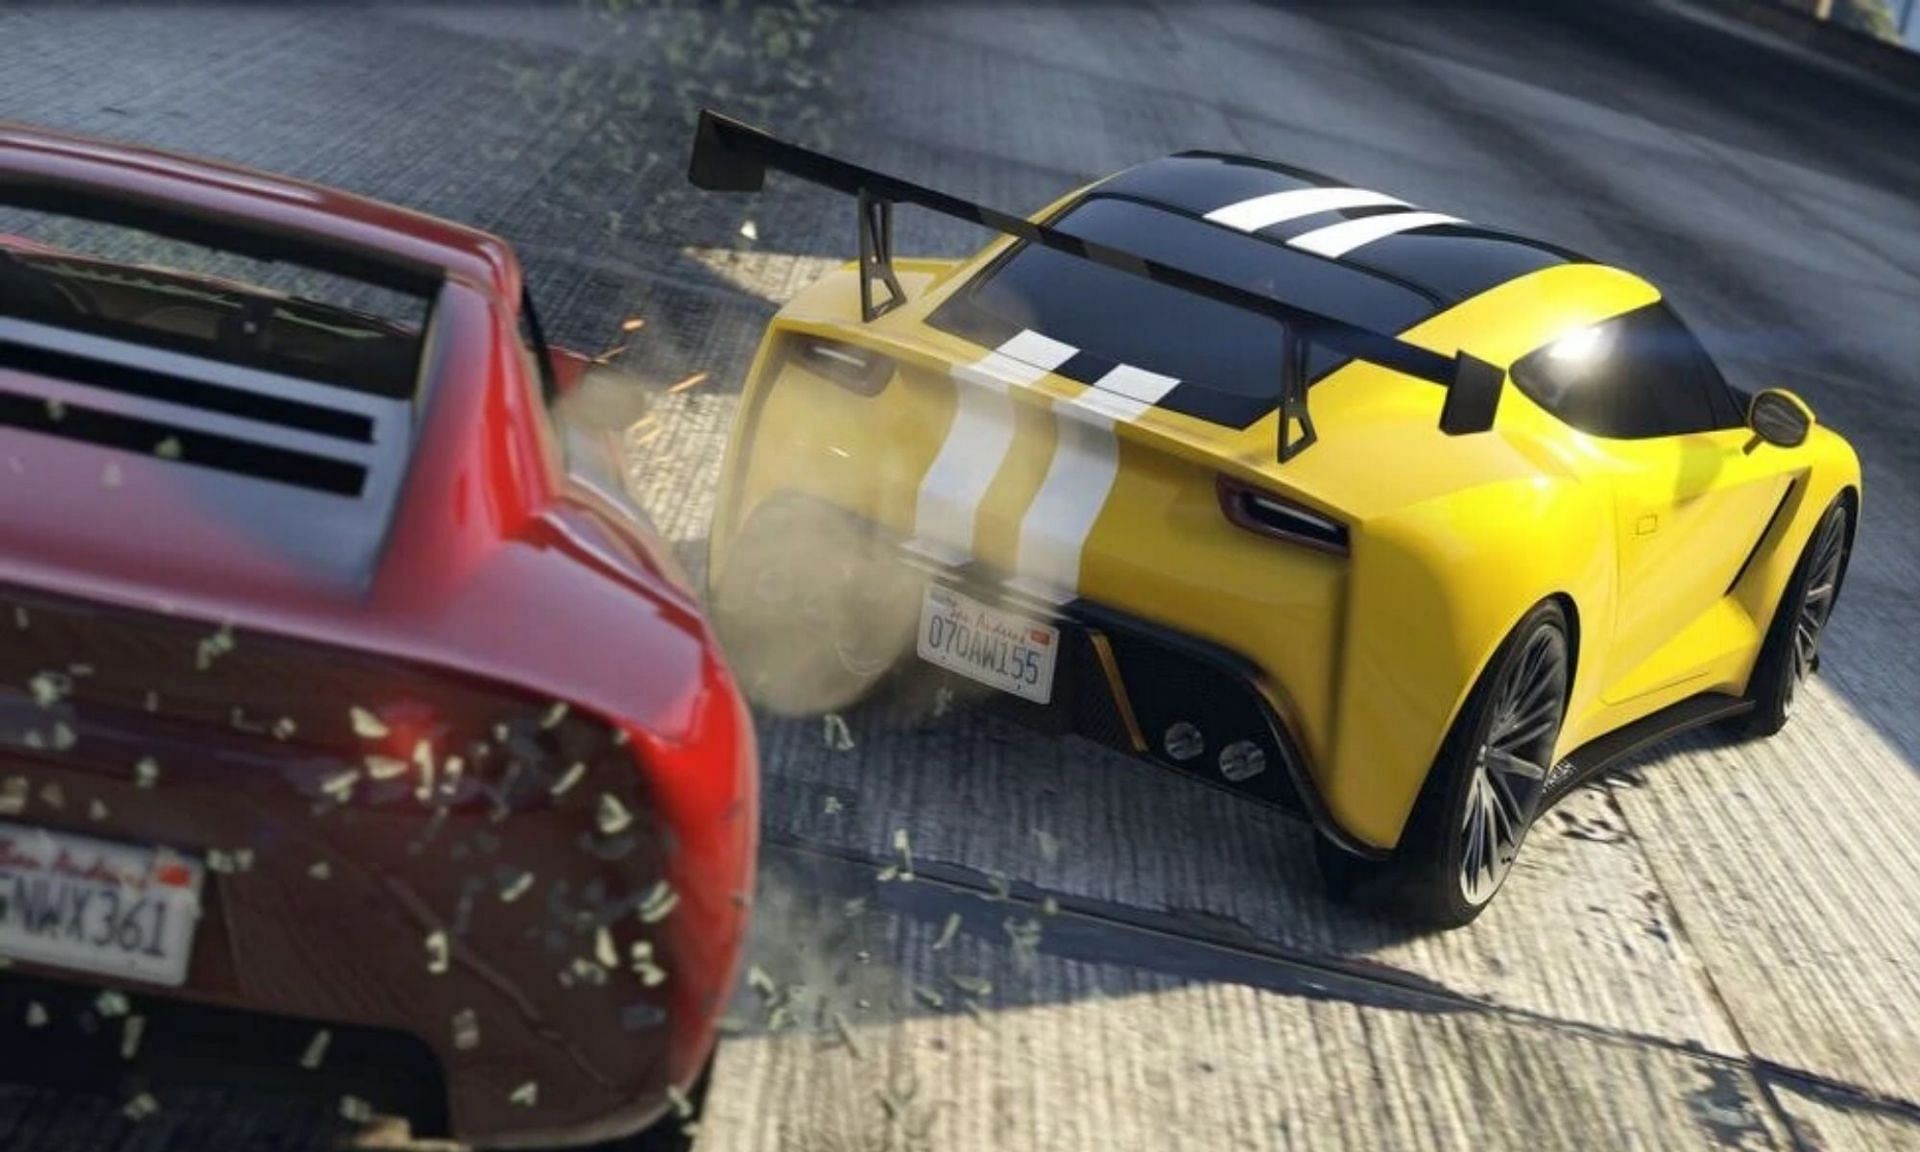 GTA Online players will like what they see with the Ocelot brand (Image via Rockstar Games)